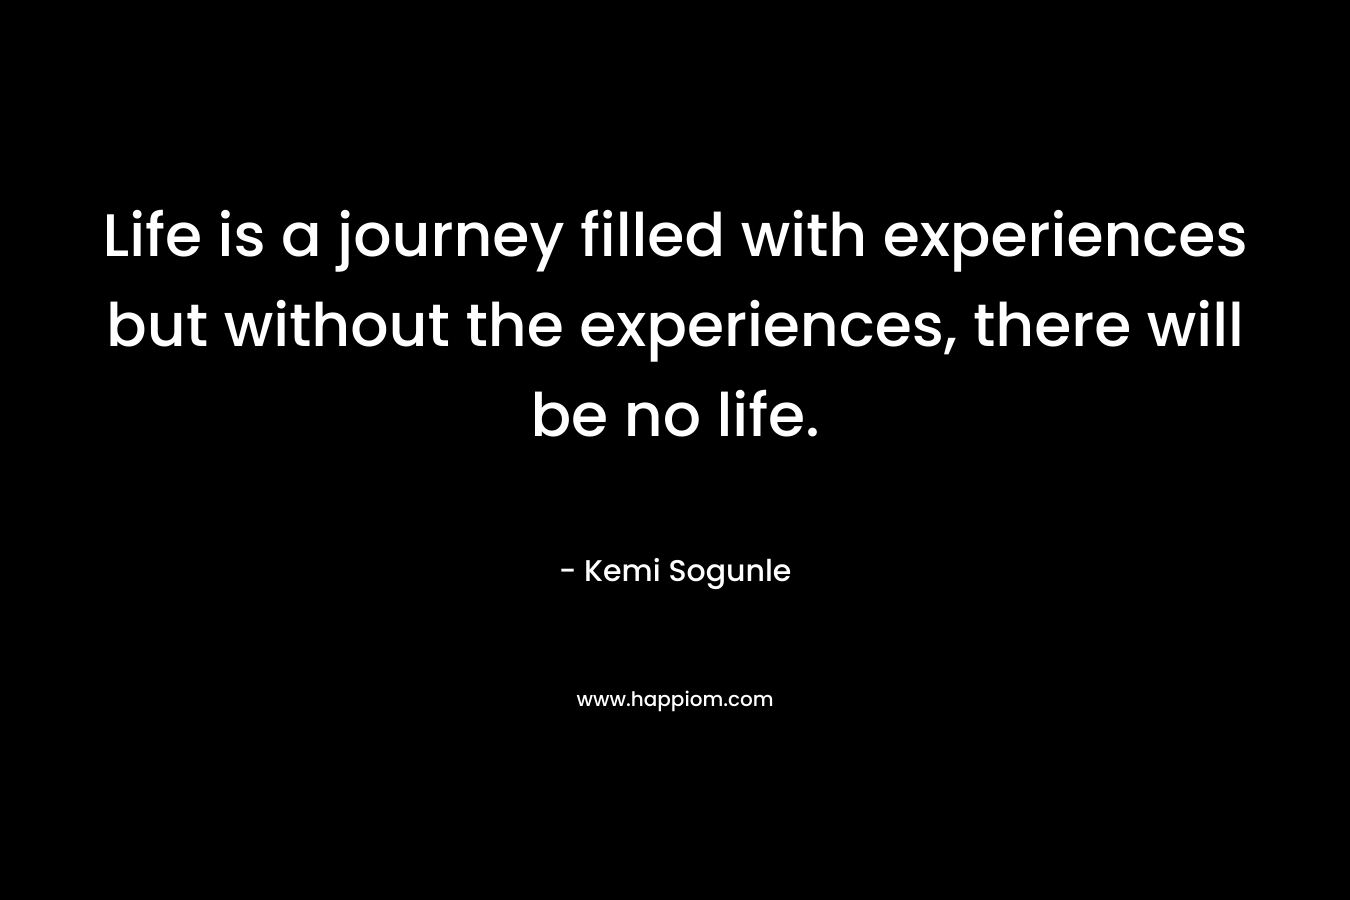 Life is a journey filled with experiences but without the experiences, there will be no life.